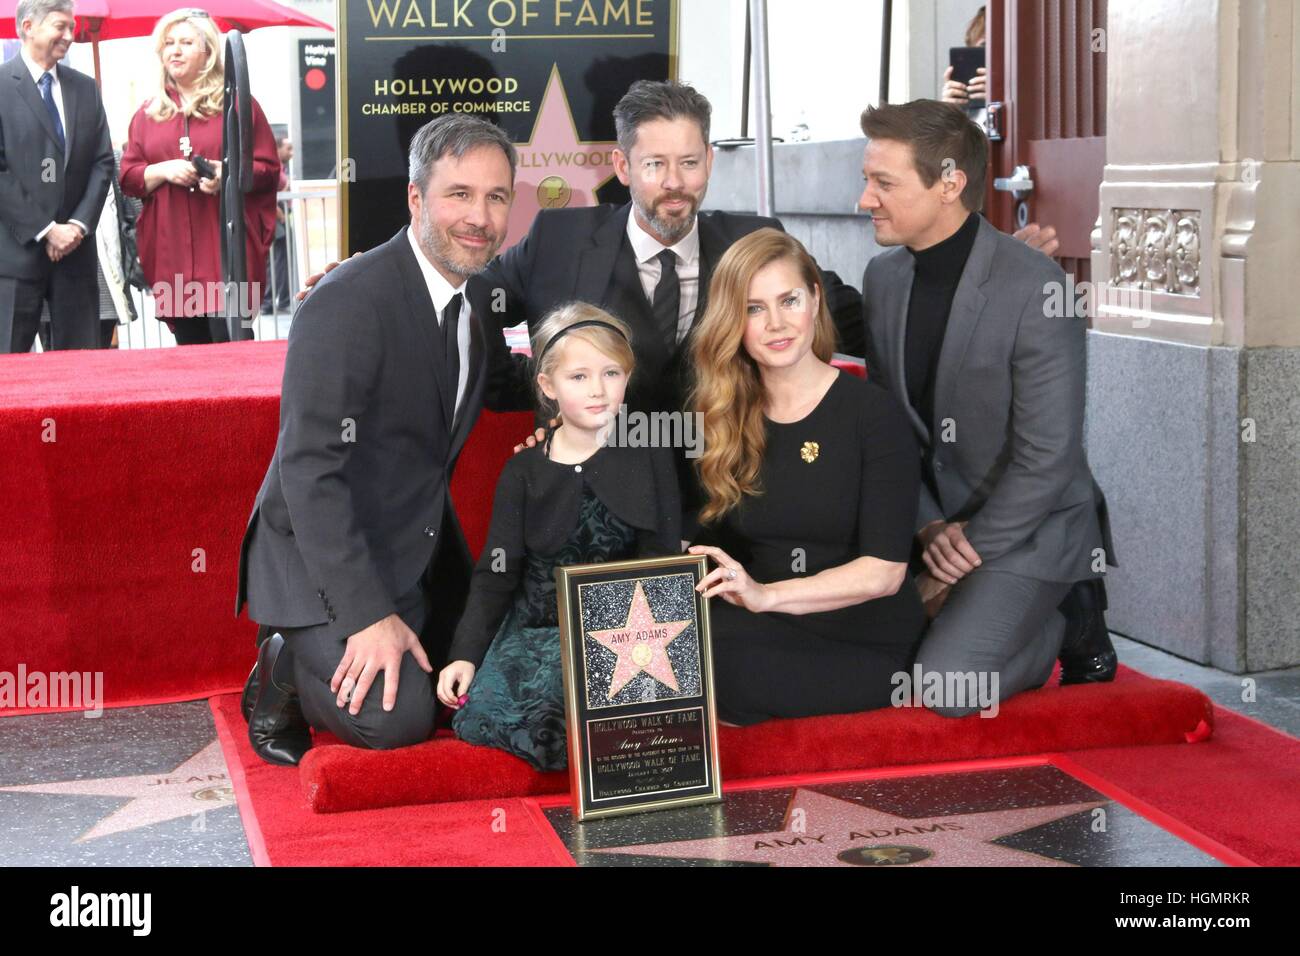 Los Angeles, CA, USA. 11th Jan, 2017. Denis Villeneuve, Aviana Olea Le Gallo, Darren Le Gallo, Amy Adams, Jeremy Renner at the press conference for Star on the Hollywood Walk of Fame for Amy Adams, Hollywood Boulevard, Los Angeles, CA. Credit: Priscilla Grant/Everett Collection/Alamy Live News Stock Photo